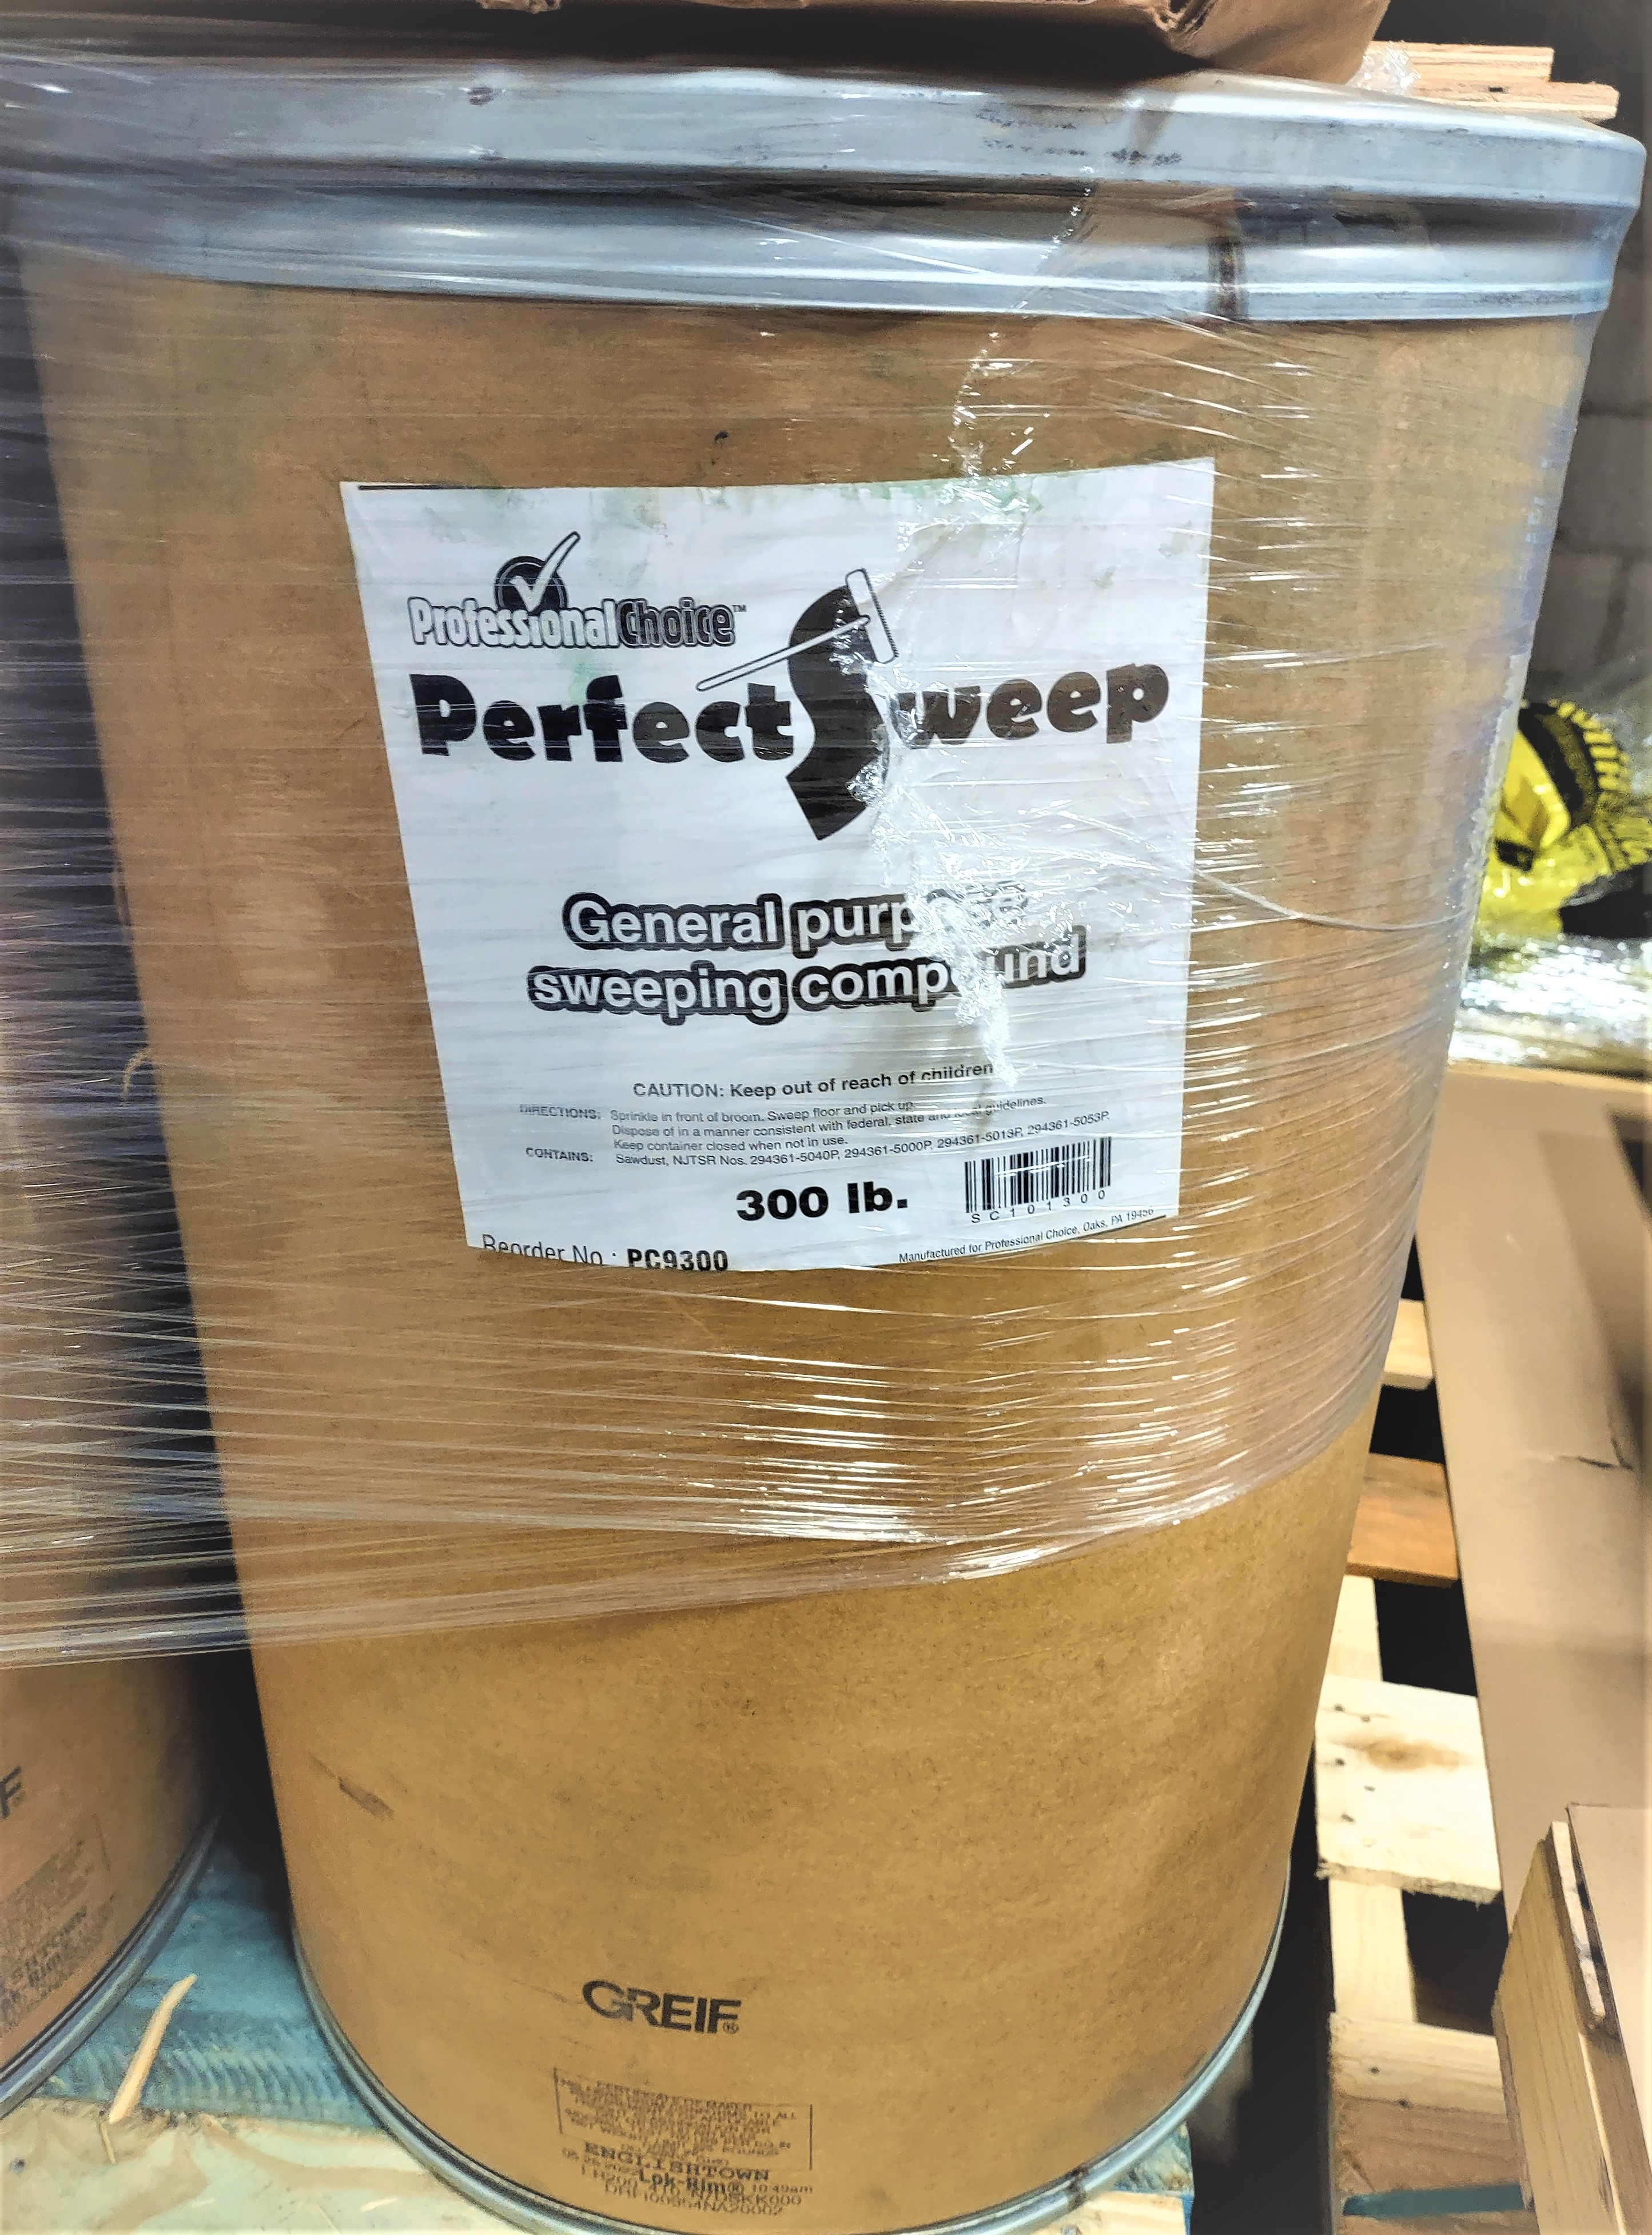 Oil Dri 300lb Mighty Sweep Green General Purpose Based Floor Sweeping Compound Drum L91300mg Replaces Perfect Pc9300 A Louis Supply